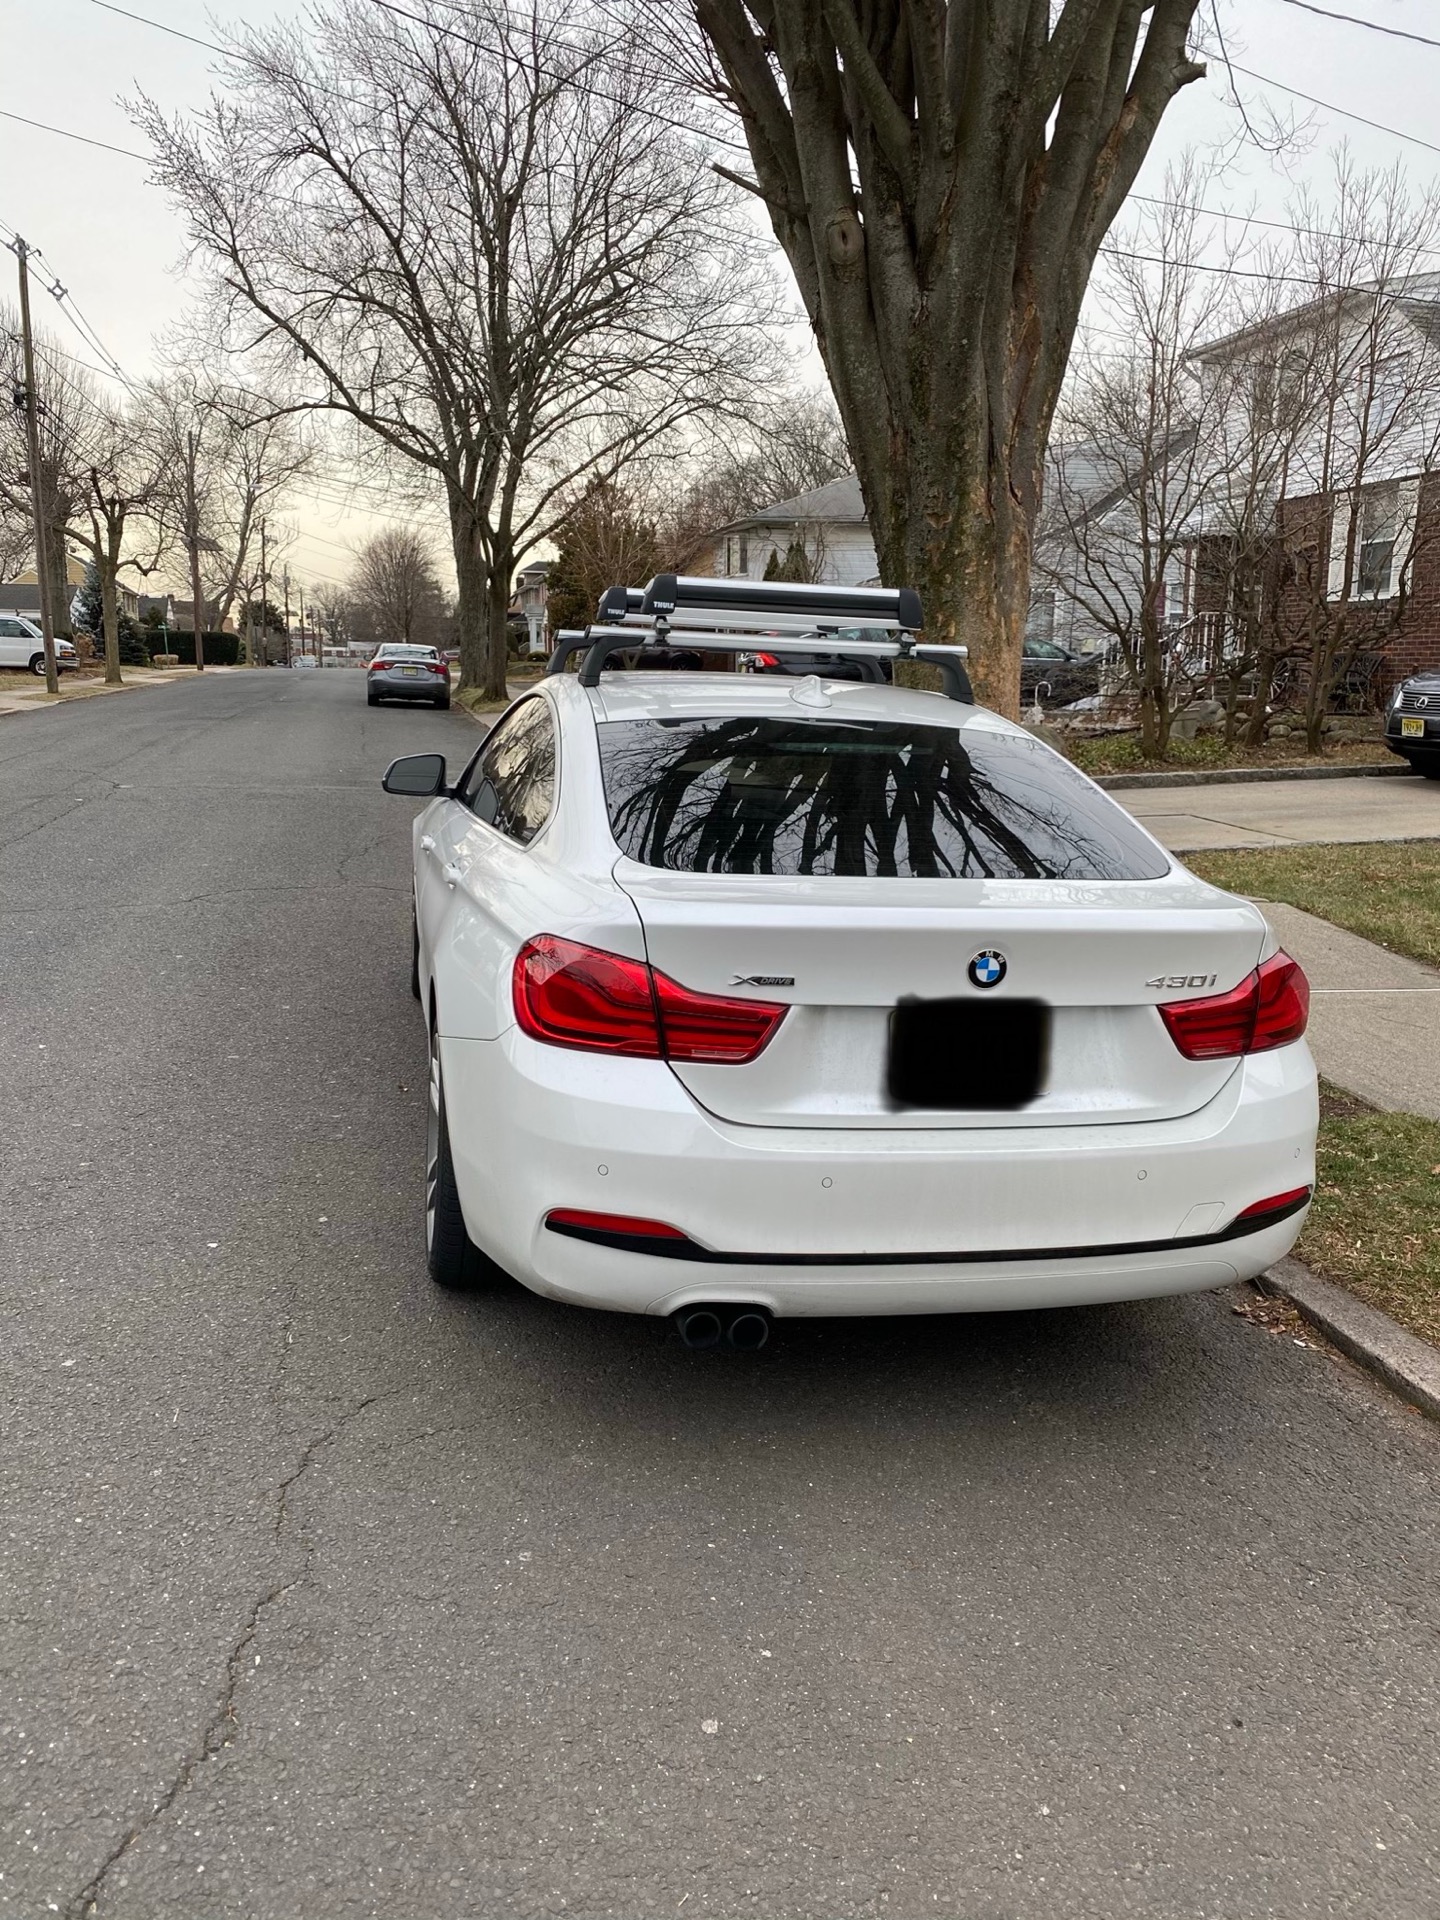 BMW 4 Series 2018 Lease Deals in Fair Lawn, New Jersey ...